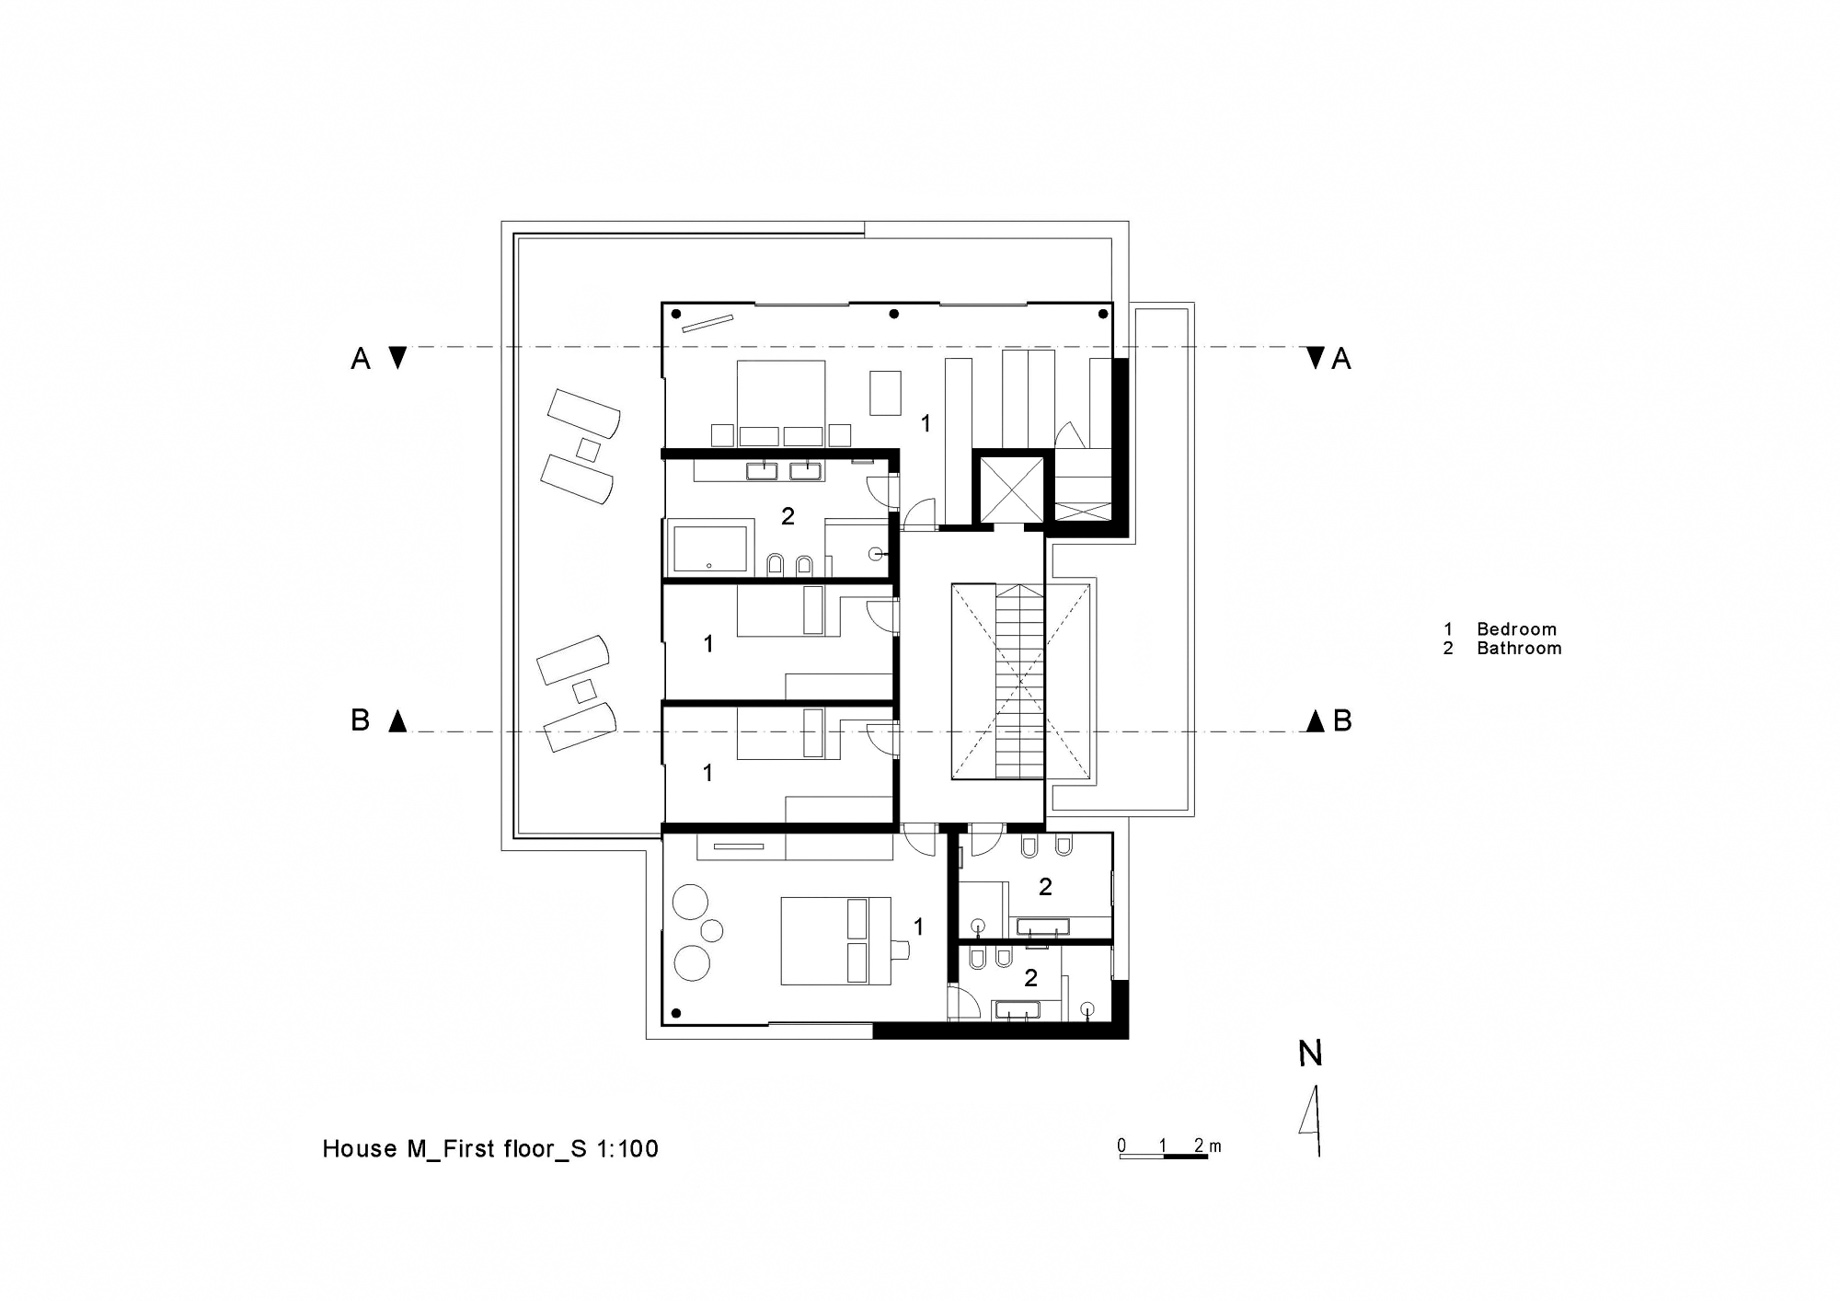 First Floor Plan – House M Luxury Residence – Merano, South Tyrol, Italy